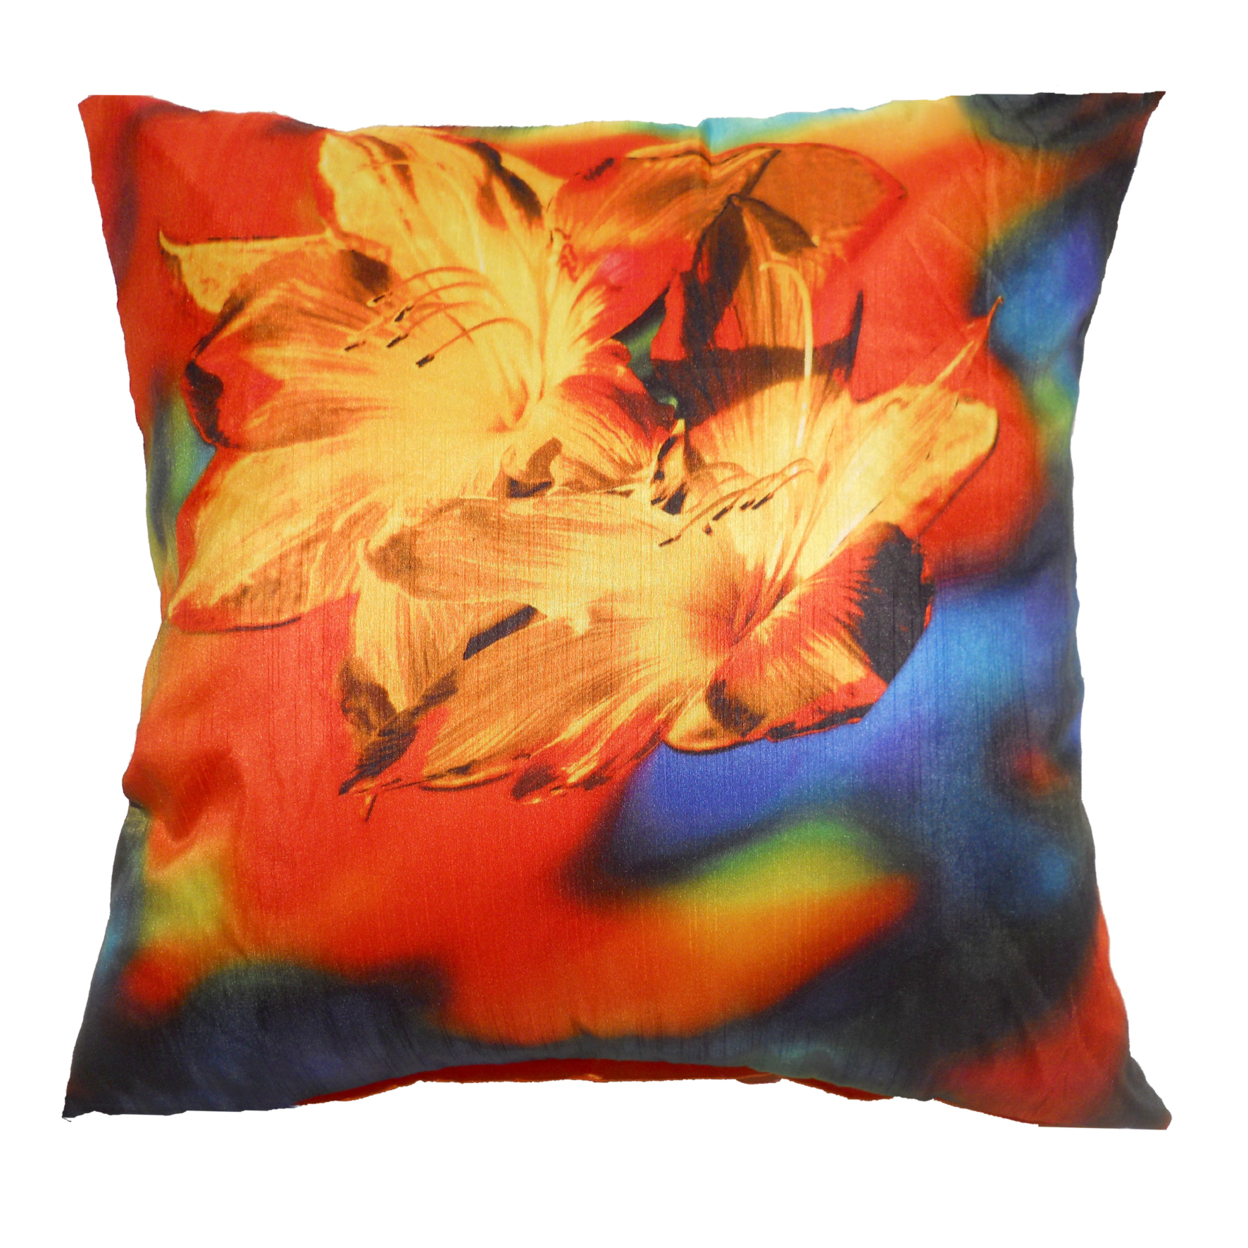 20 X 20 Inch Accent Pillow With Hibiscus Digital Print, Set Of 2, Beige And Blue- Saltoro Sherpi